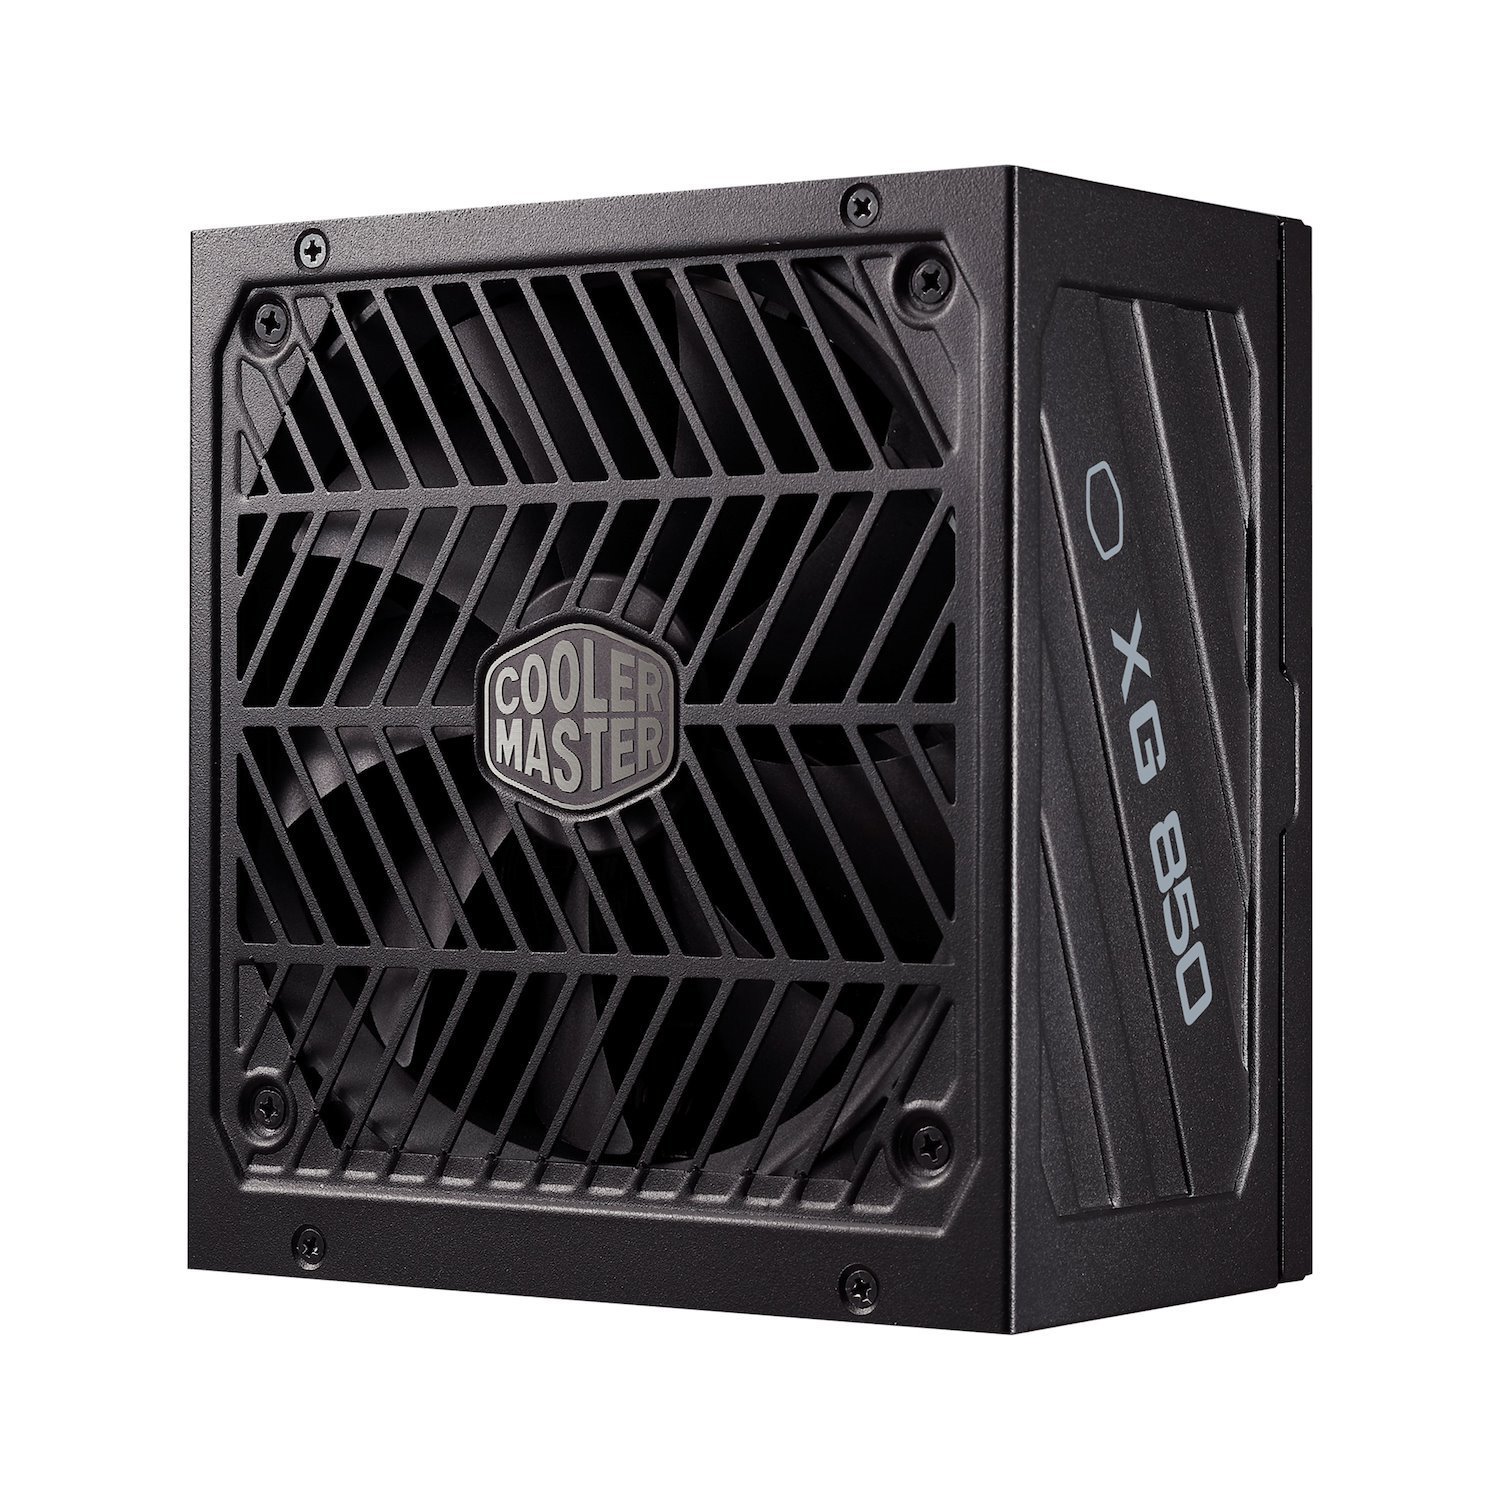 Cooler Master XG850 Platinum Power Supply Unit 850 W 24-Pin Atx Atx Black (Cooler Master XG850 Platinum Psu - 80 Plus Platinum 850W Fully Modular Quiet 135MM Fan Smart Thermal Control Mode With HYB